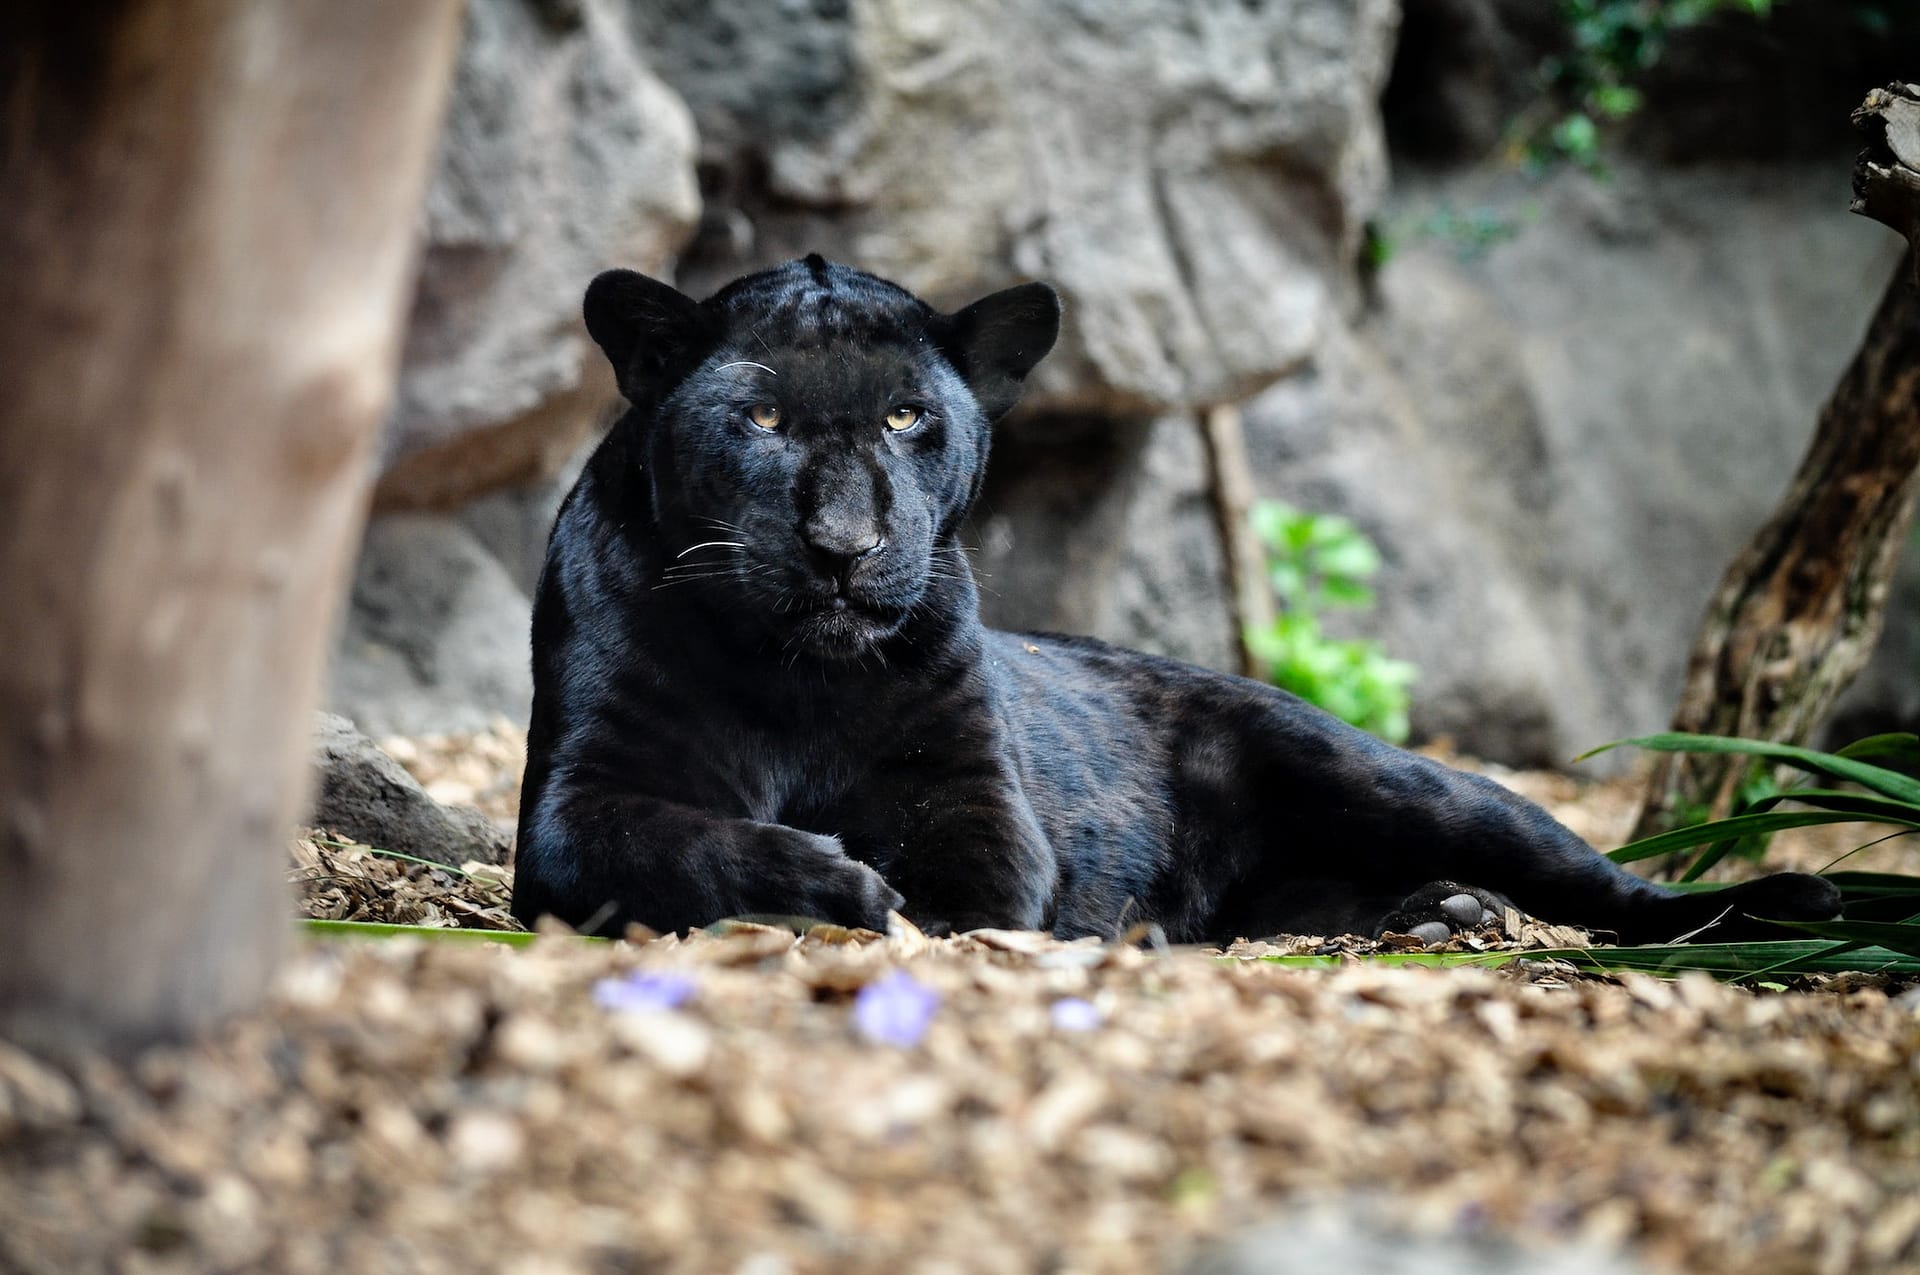 Black panther lying on the ground and looking.